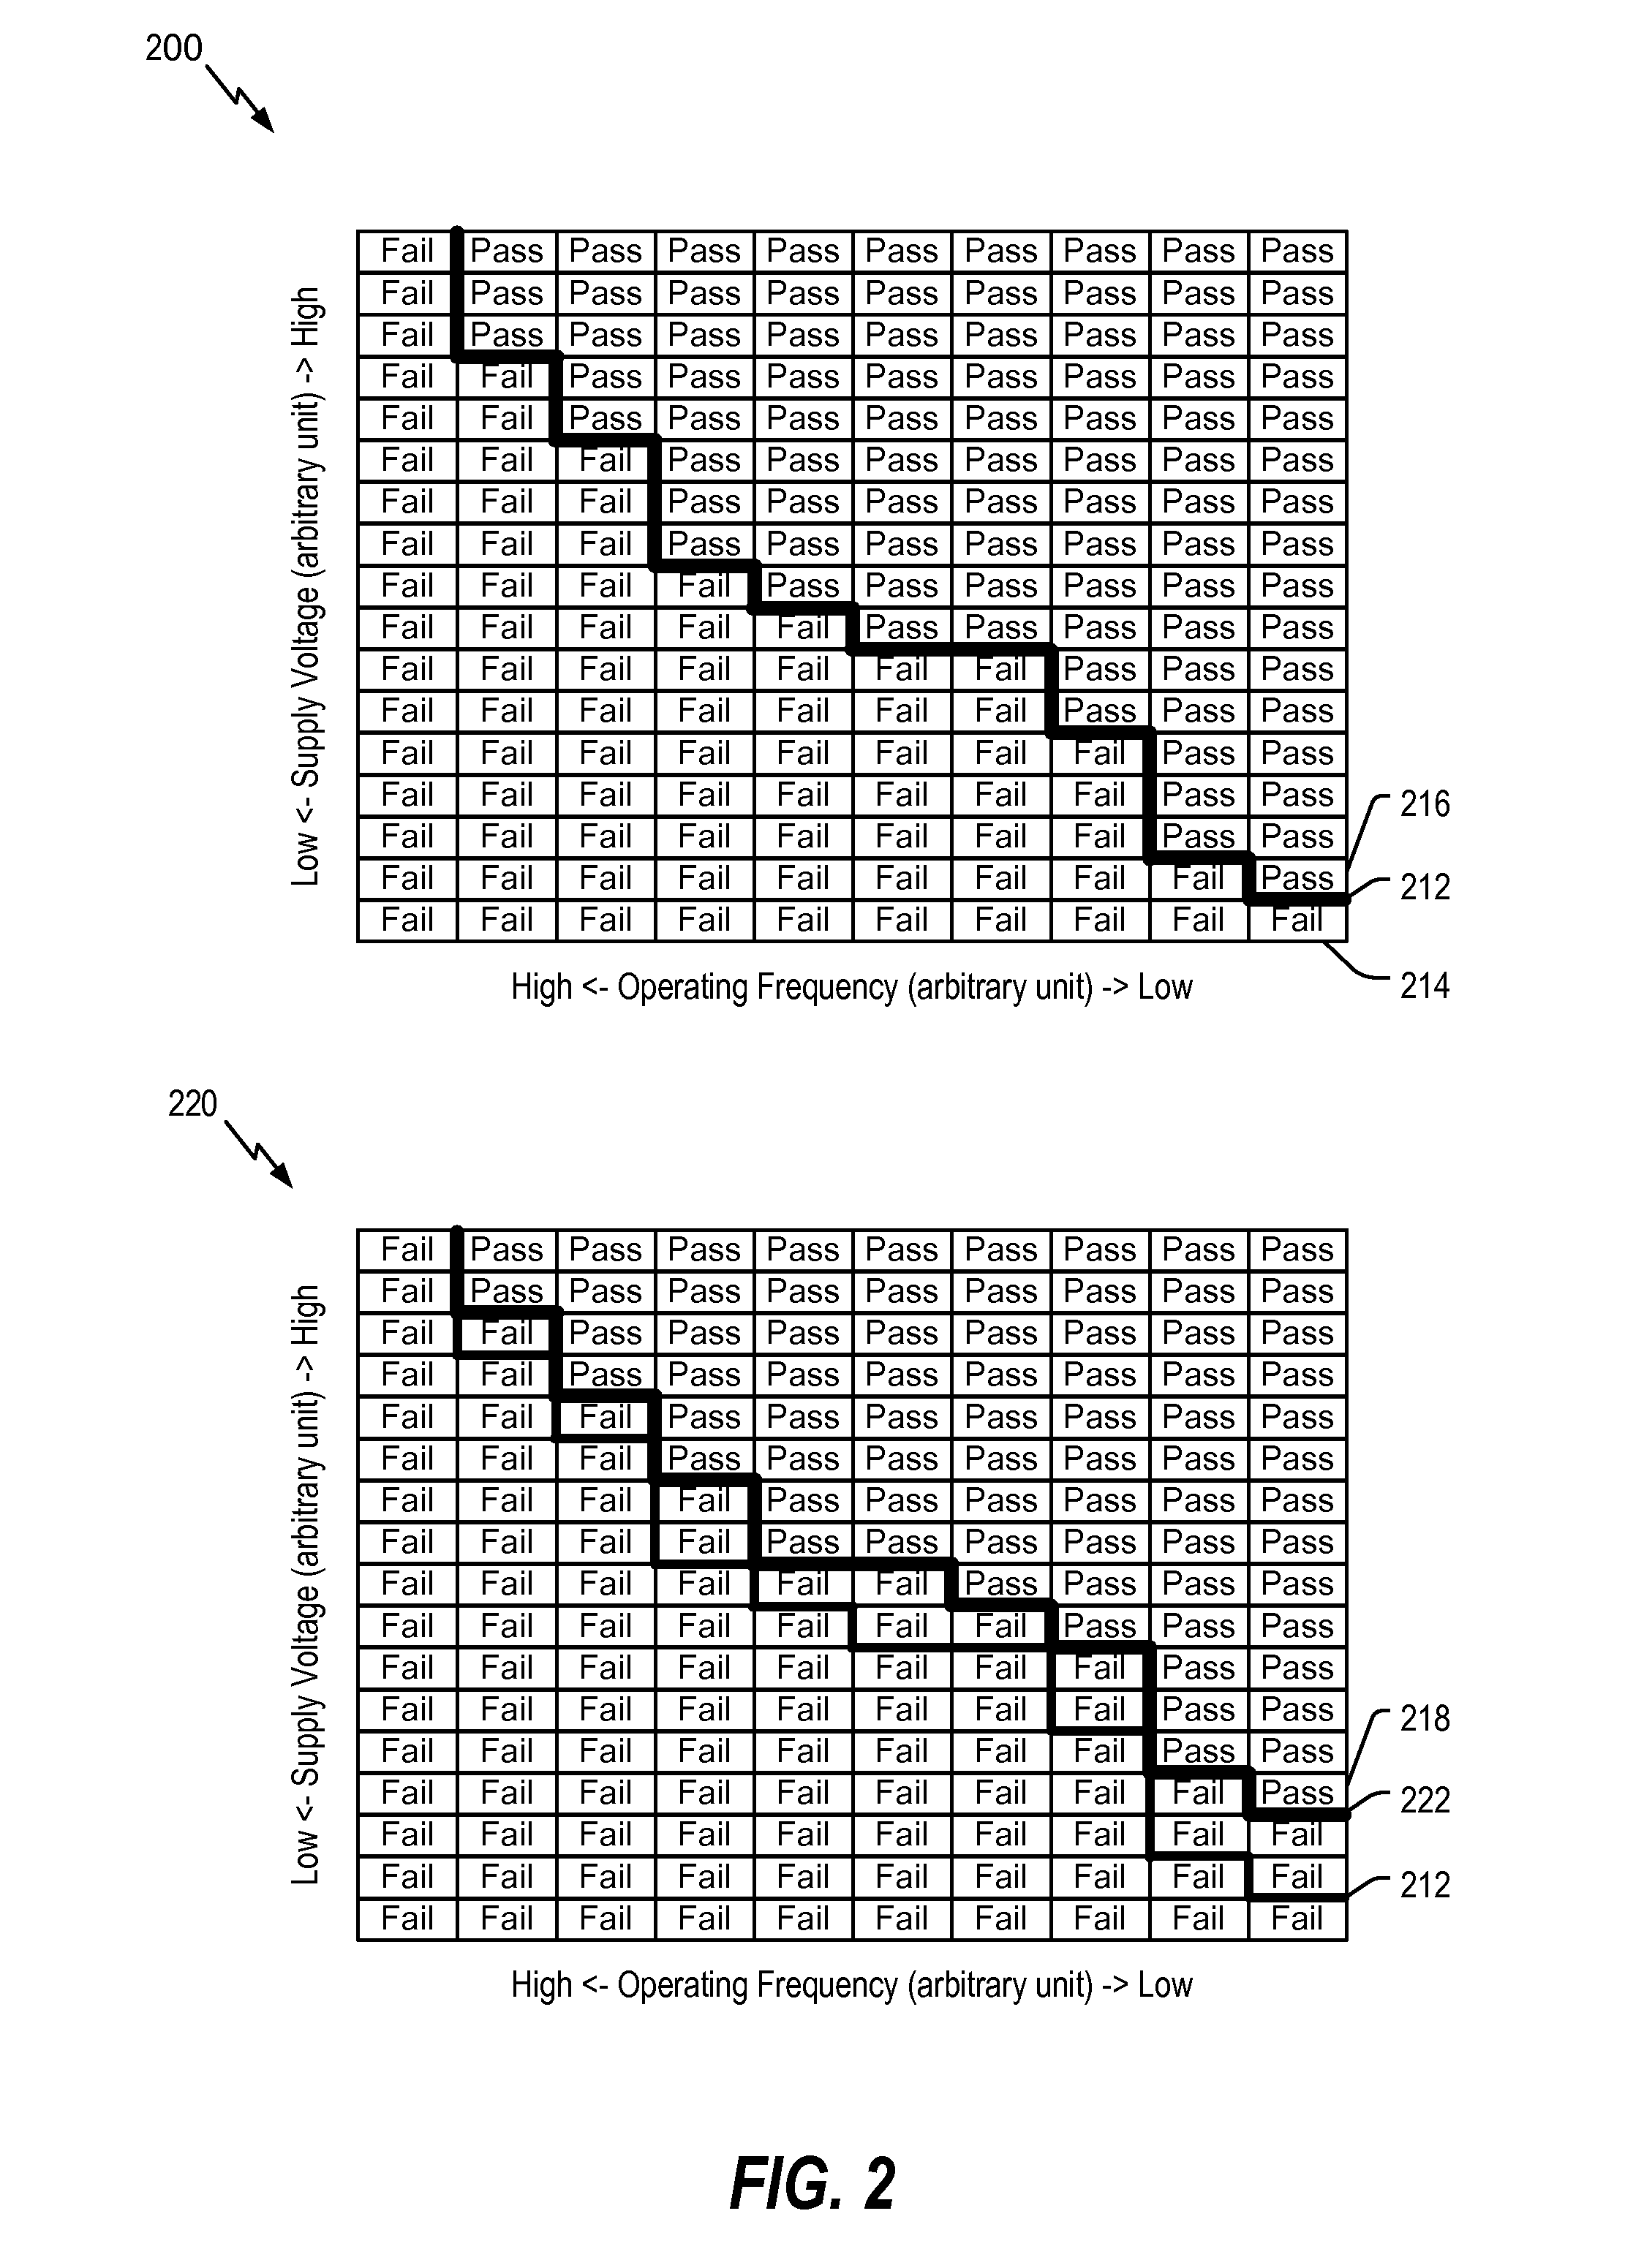 Memory device with adaptive voltage scaling based on error information